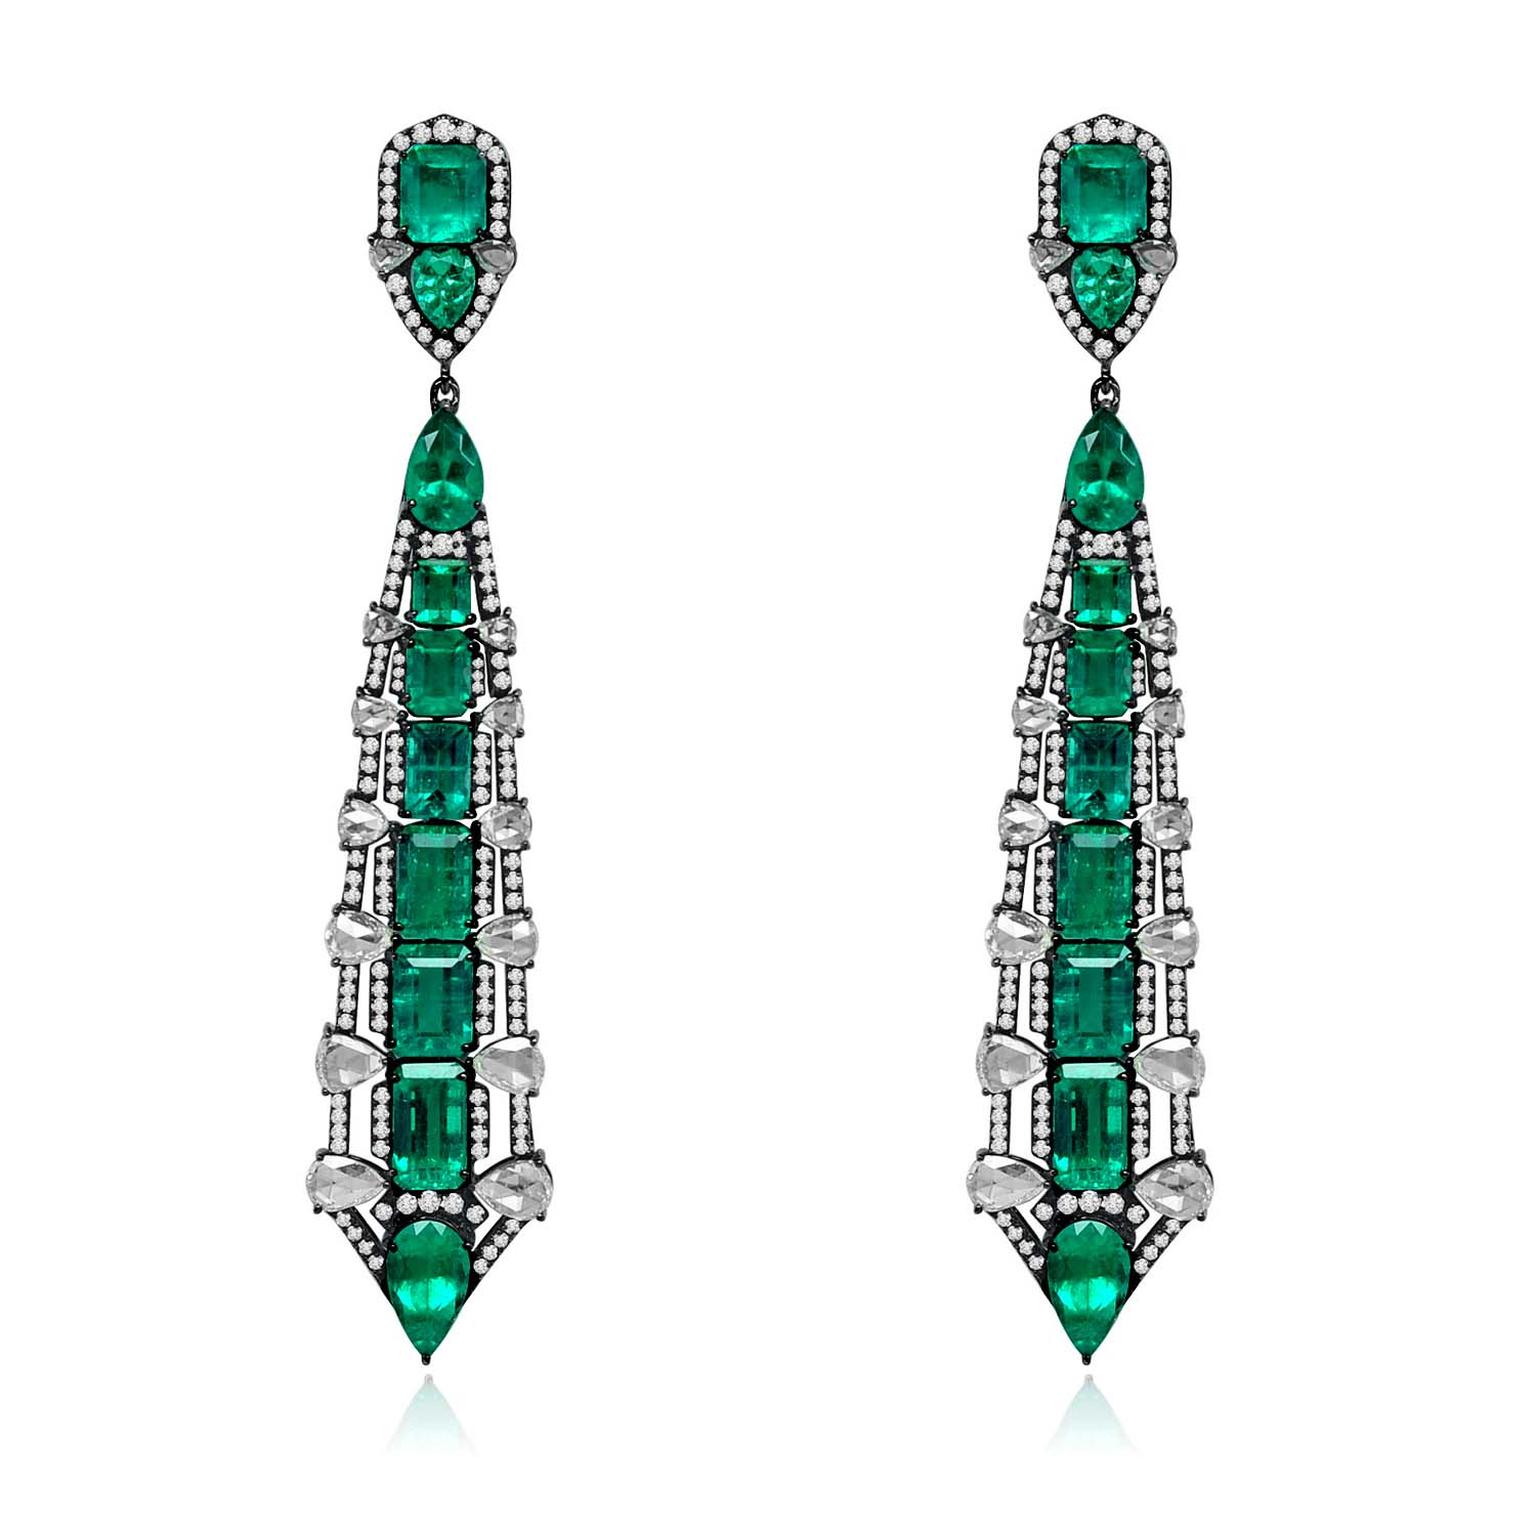 Sutra earrings with emeralds and diamonds in black gold.